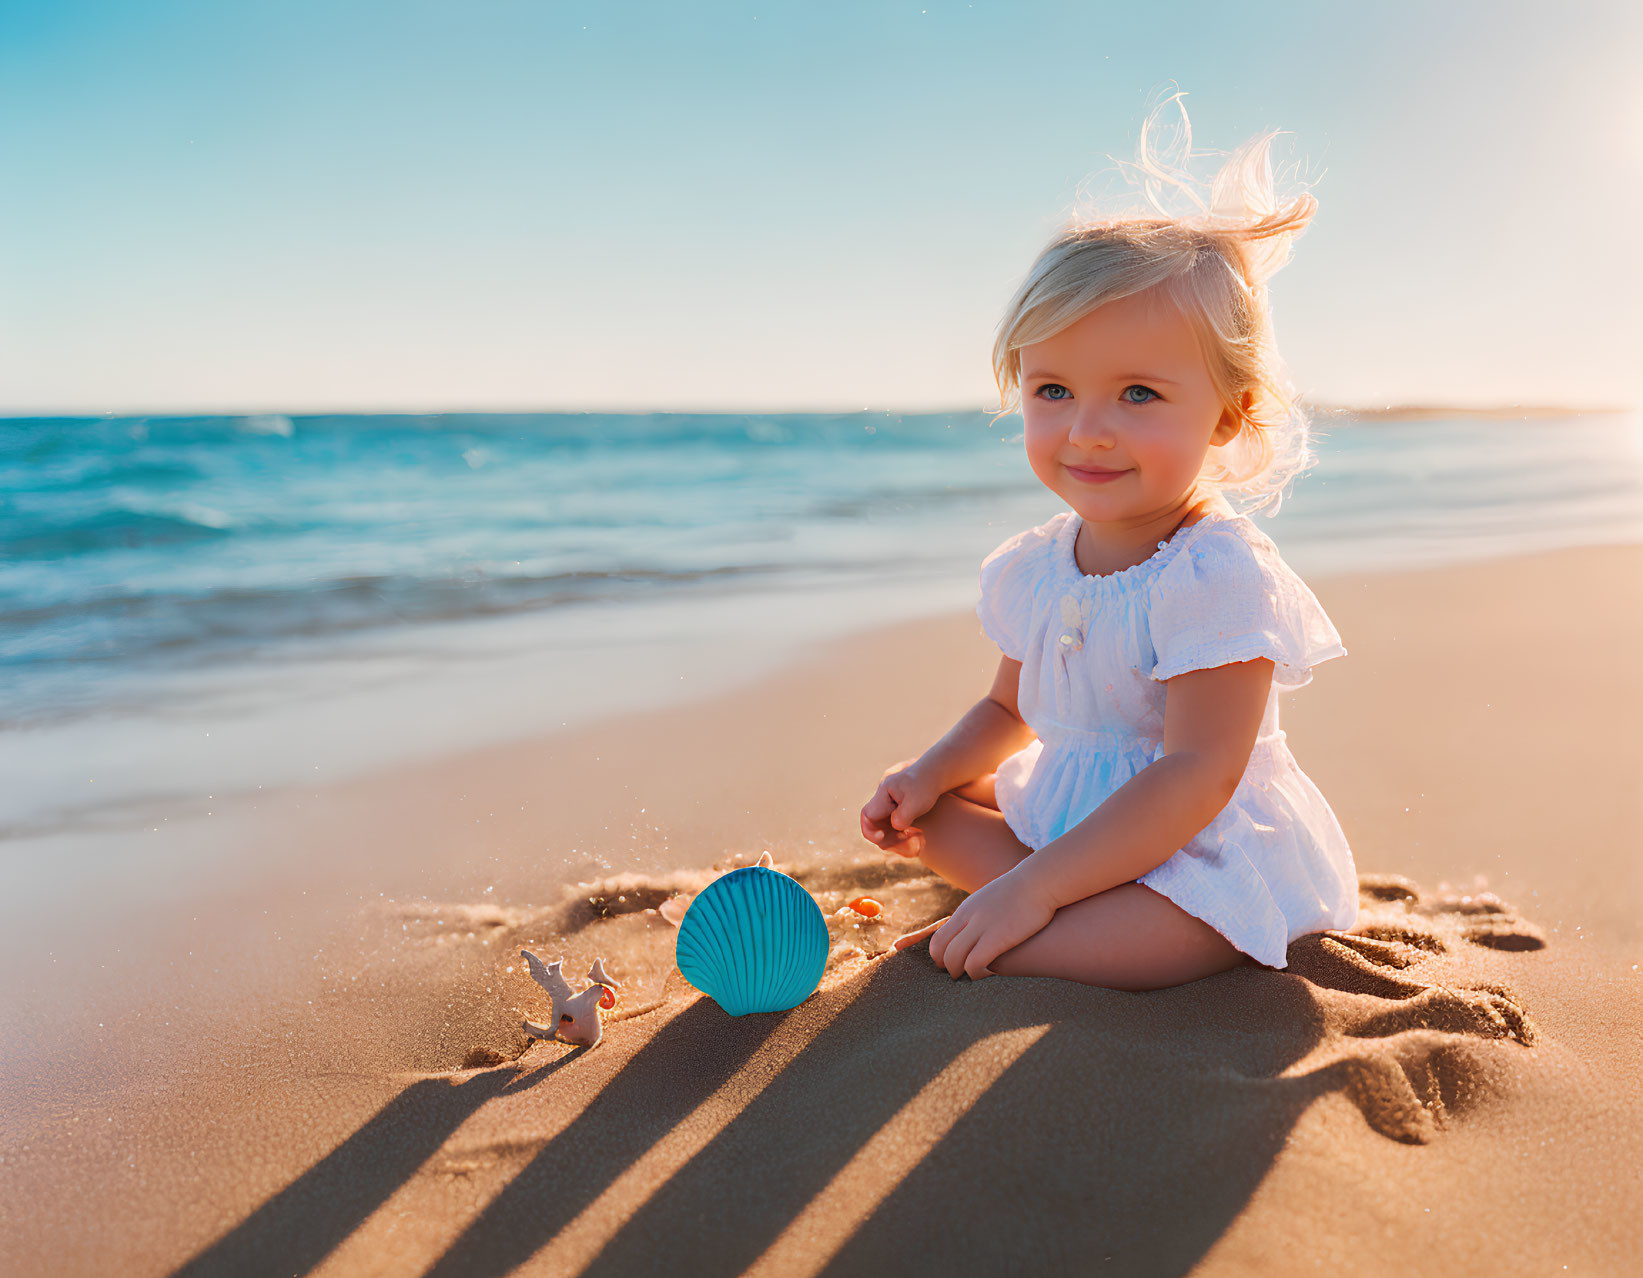 Child in white dress playing with blue ball on beach with ocean background